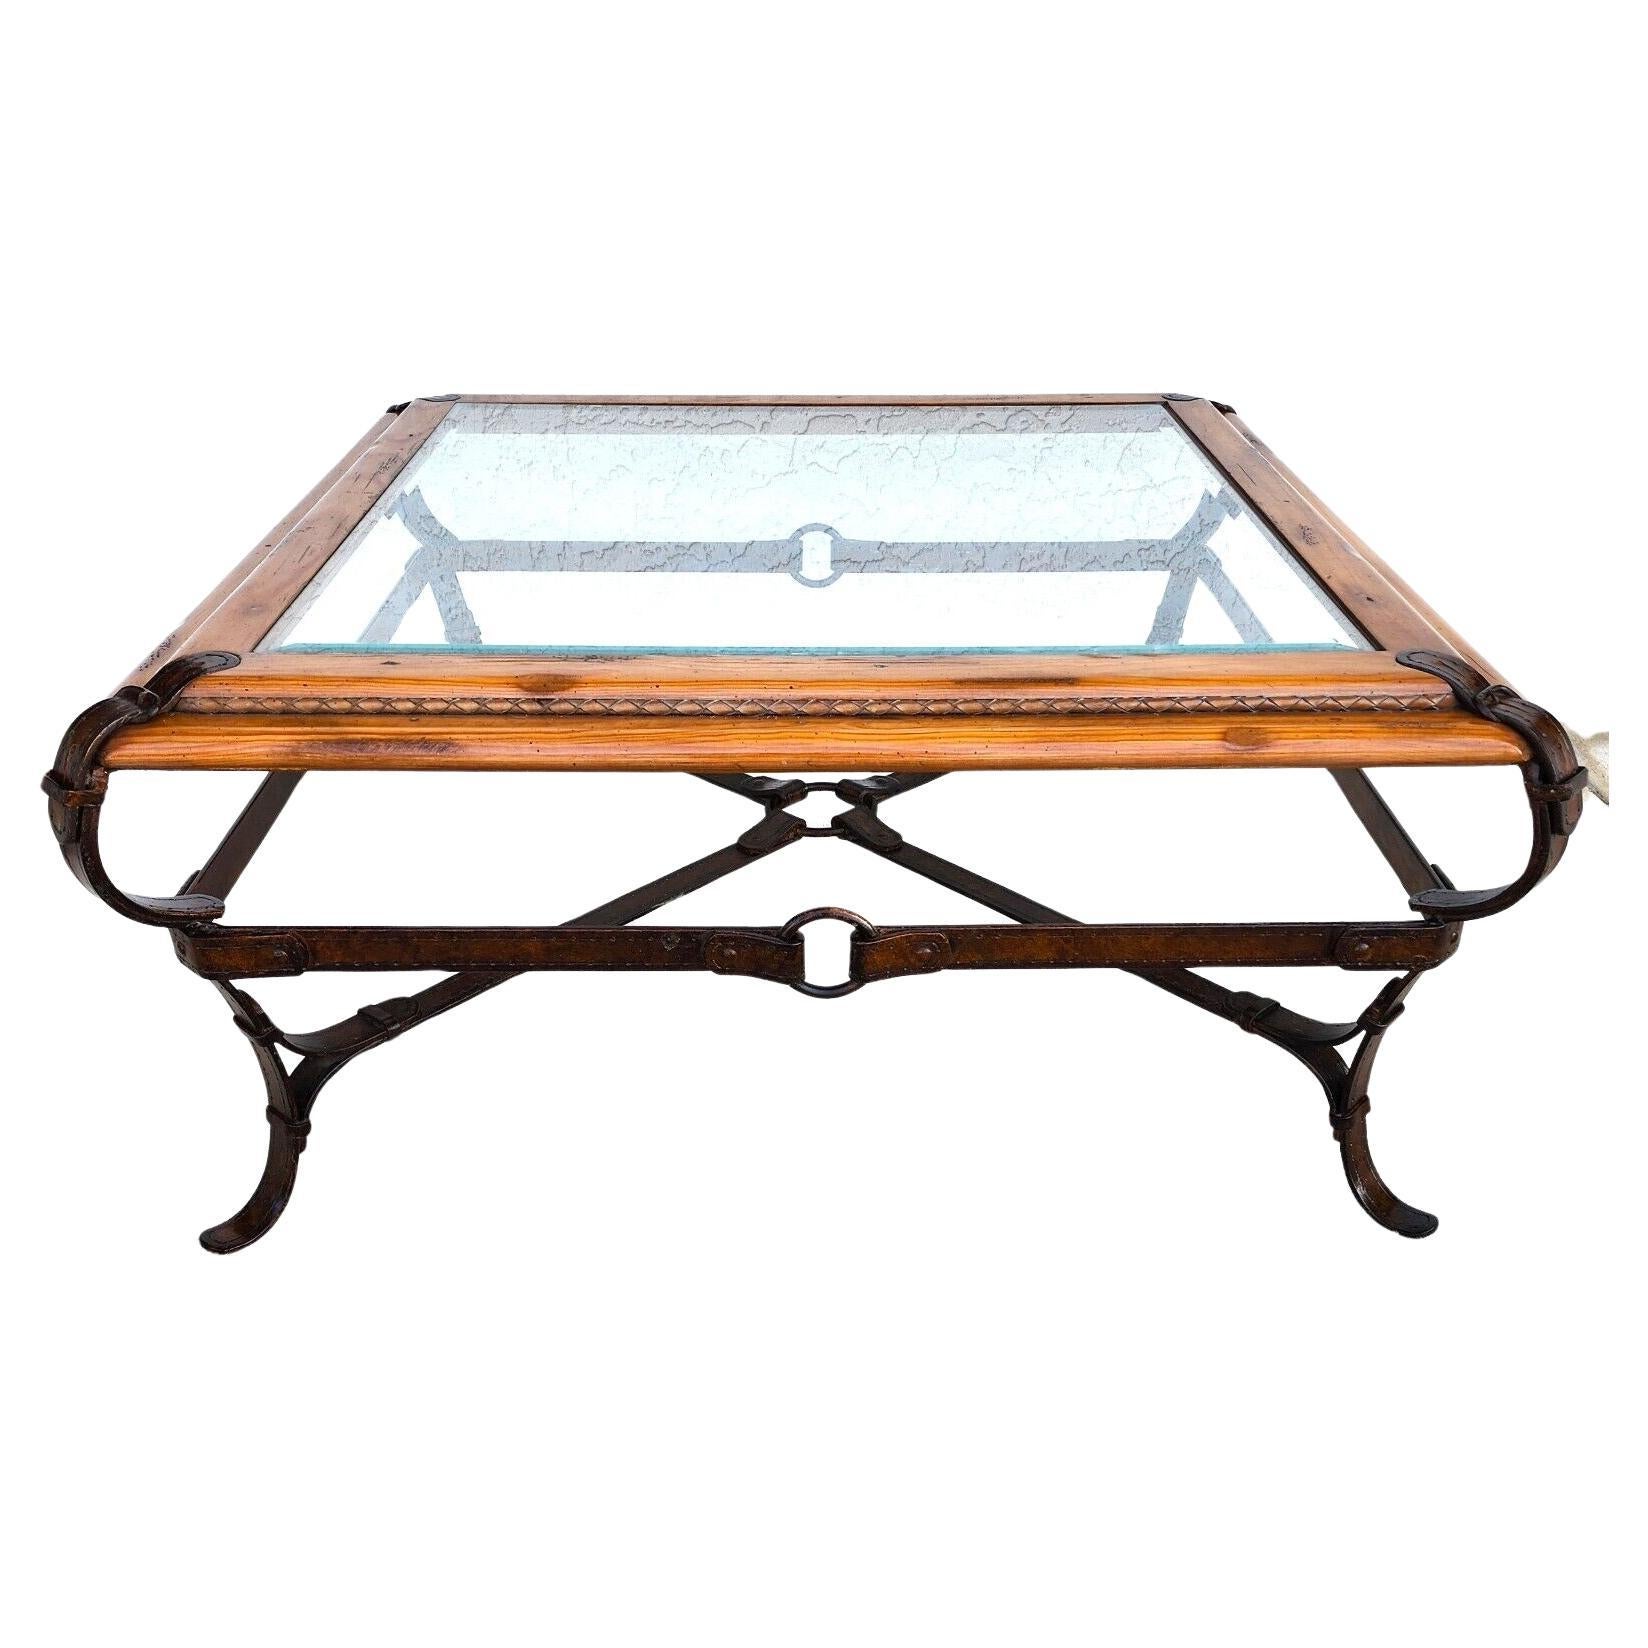 Adnet Hermes Style Coffee Table Equestrian Ranch Rustic